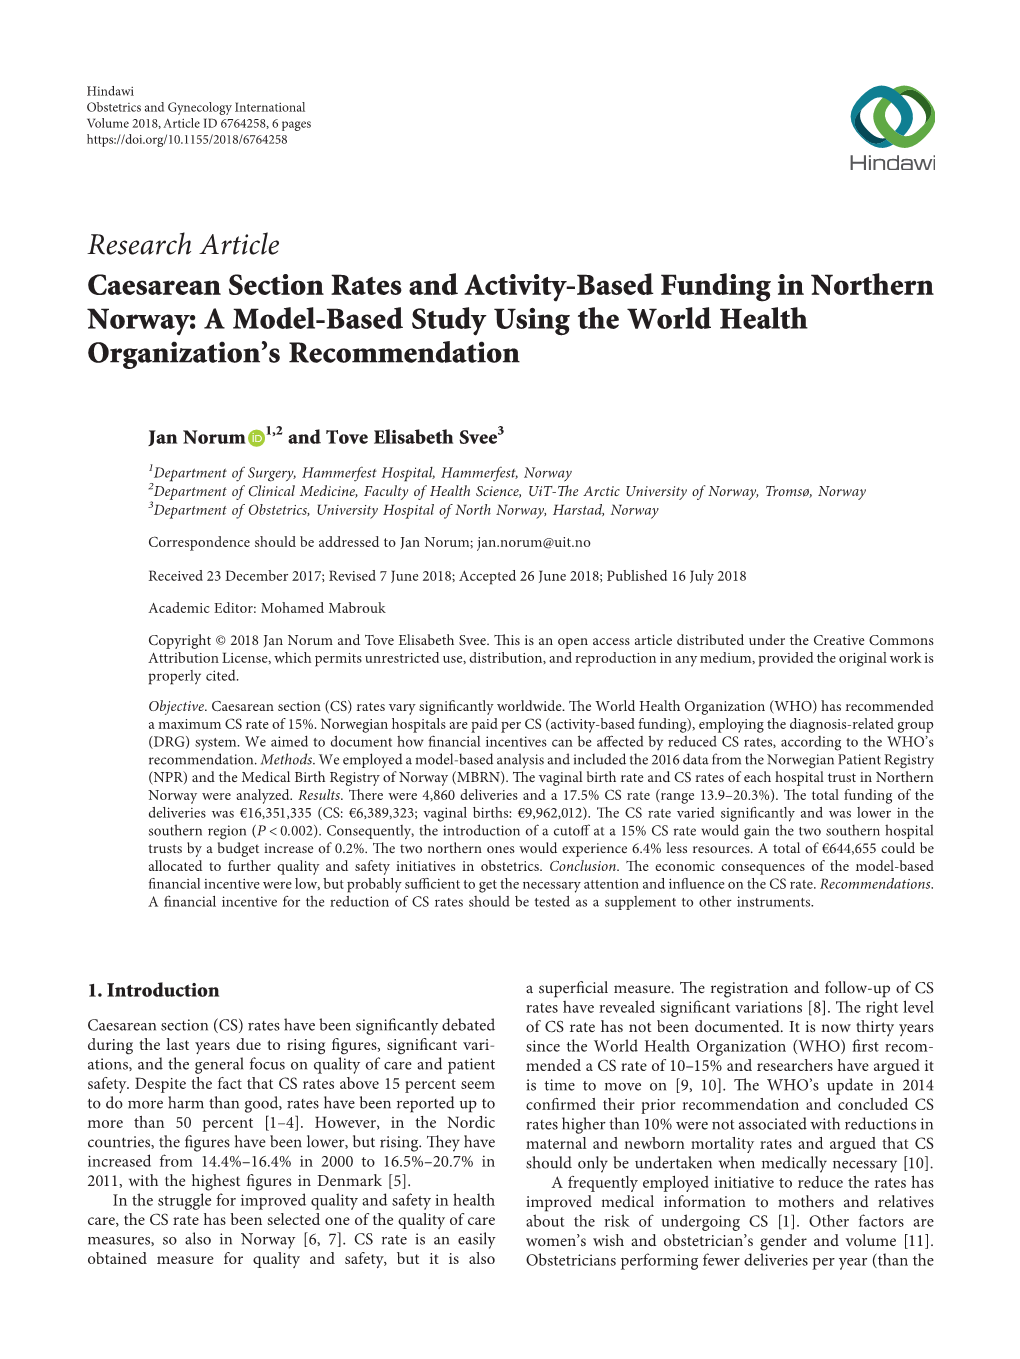 Caesarean Section Rates and Activity-Based Funding in Northern Norway: a Model-Based Study Using the World Health Organization’S Recommendation